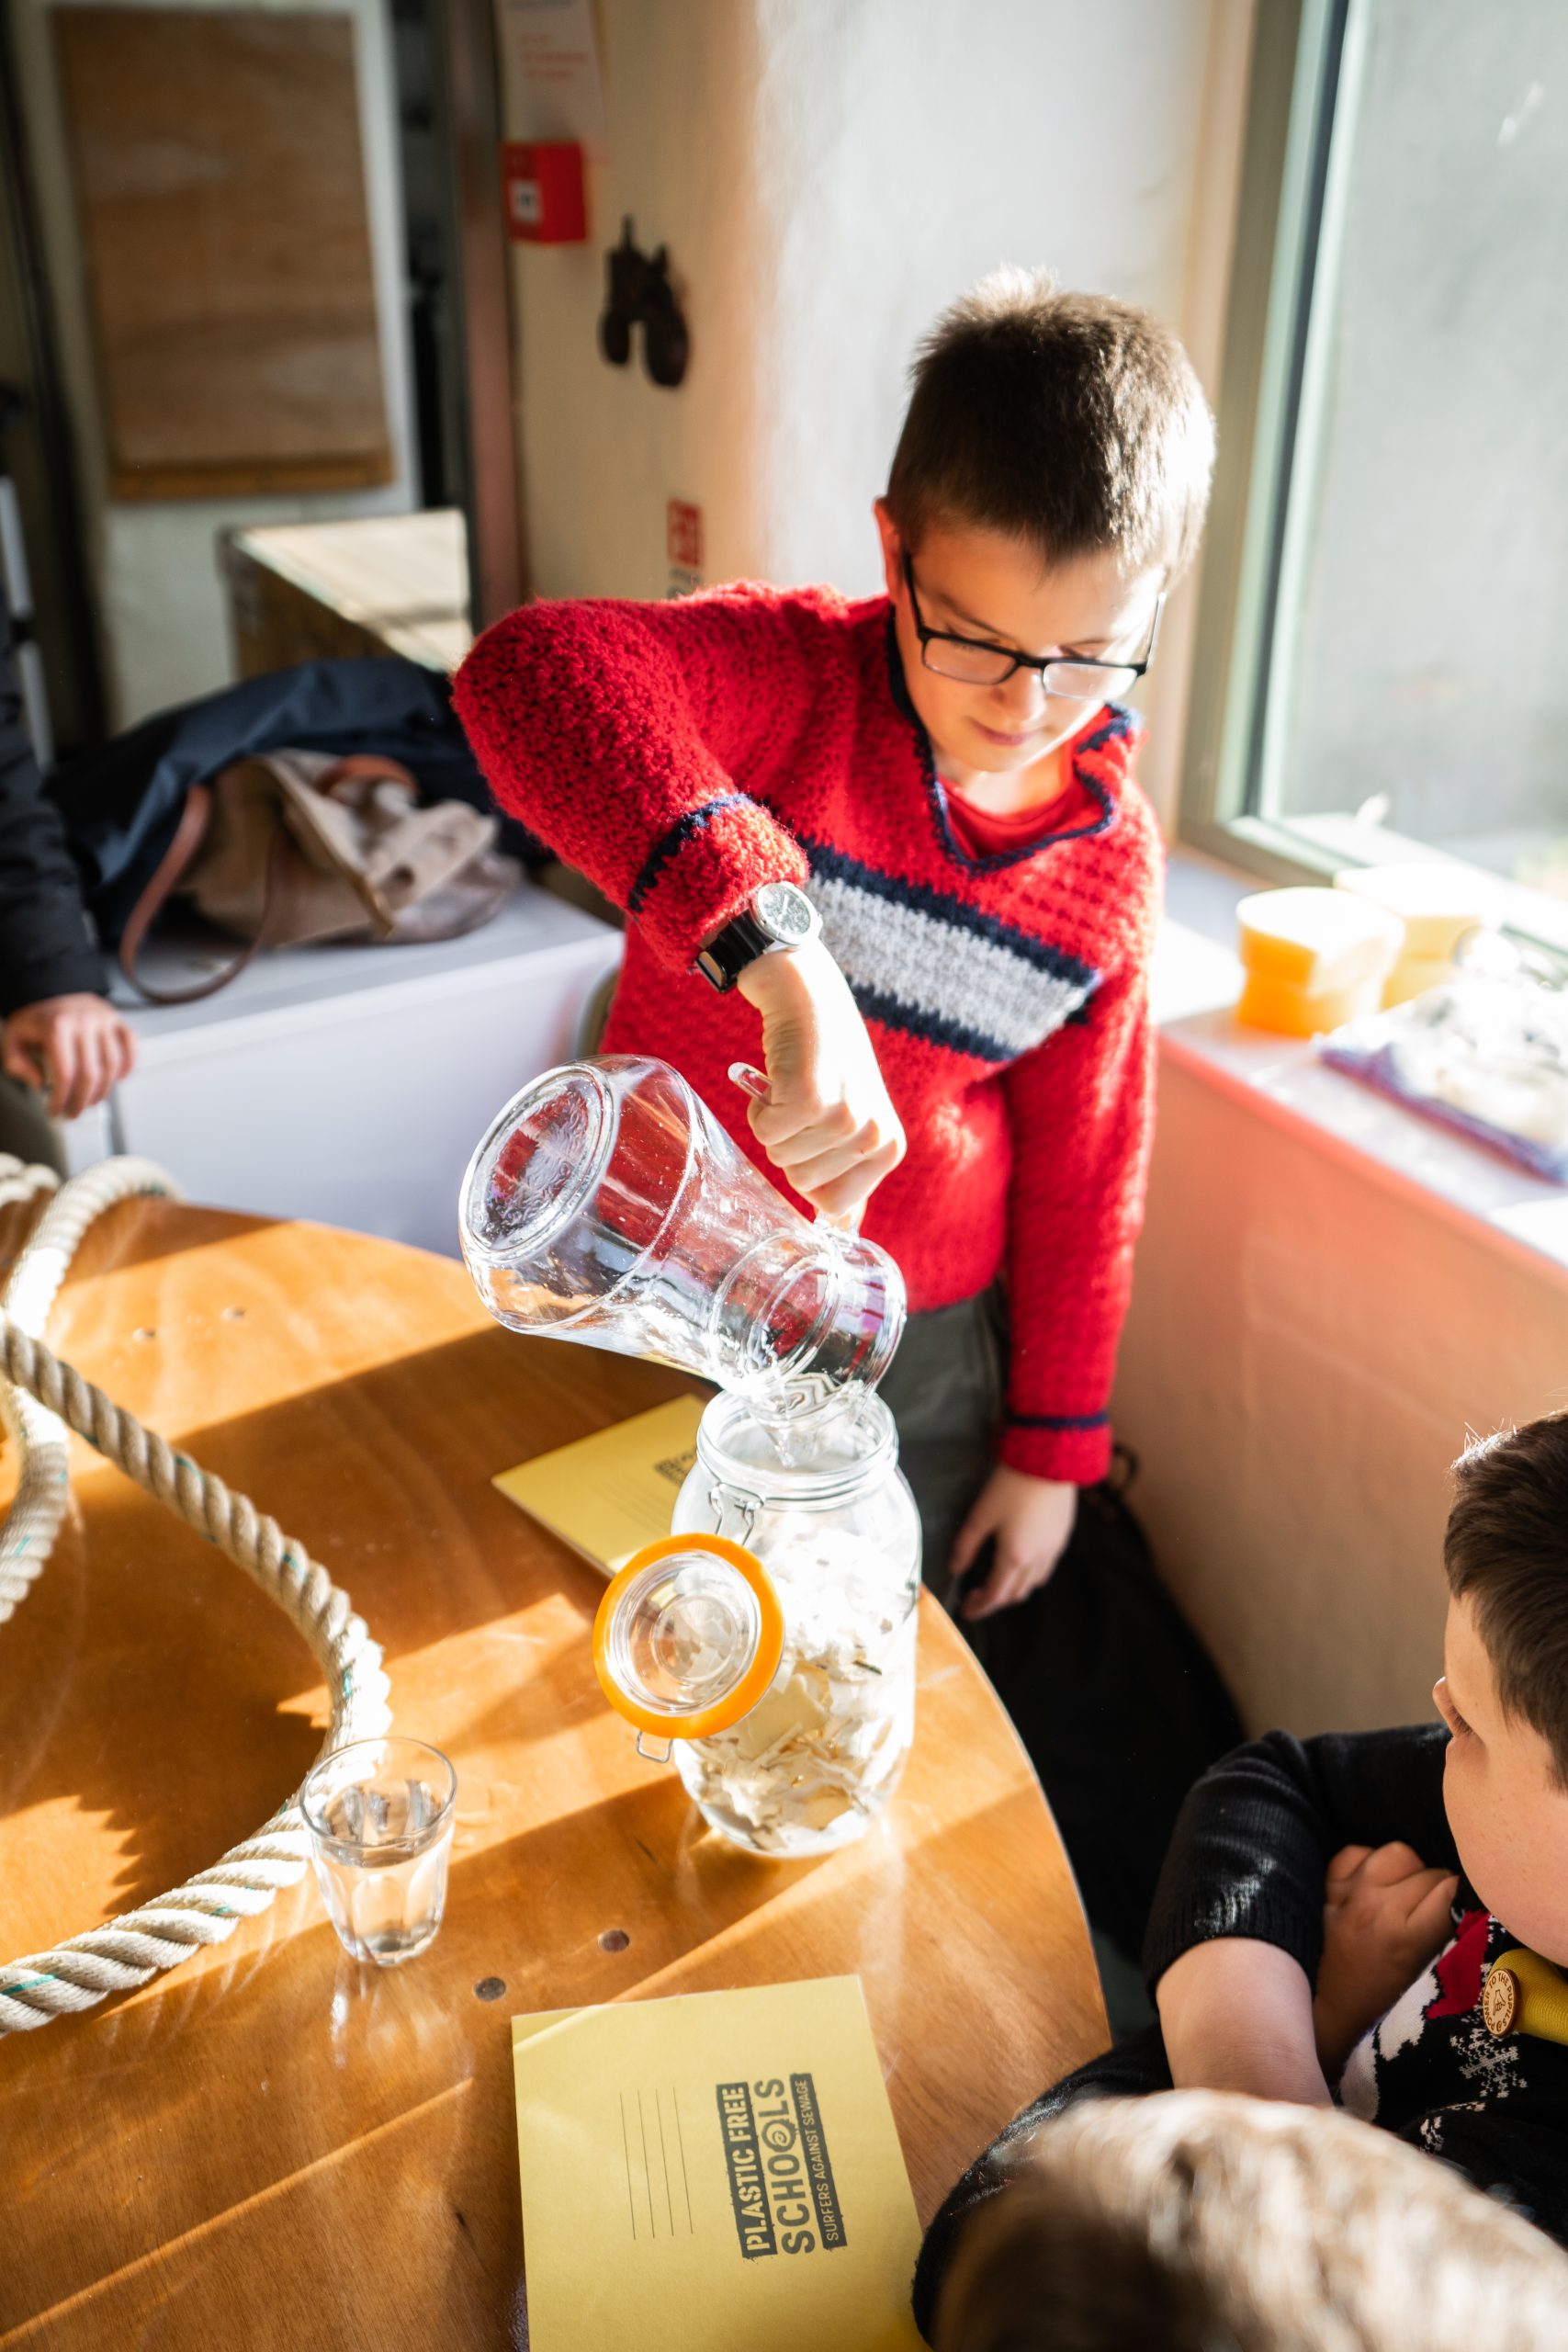 In ‘The Science of Plastic’ lesson, pupils conduct an experiment using plastic and water. Photo by Jack Abbott.